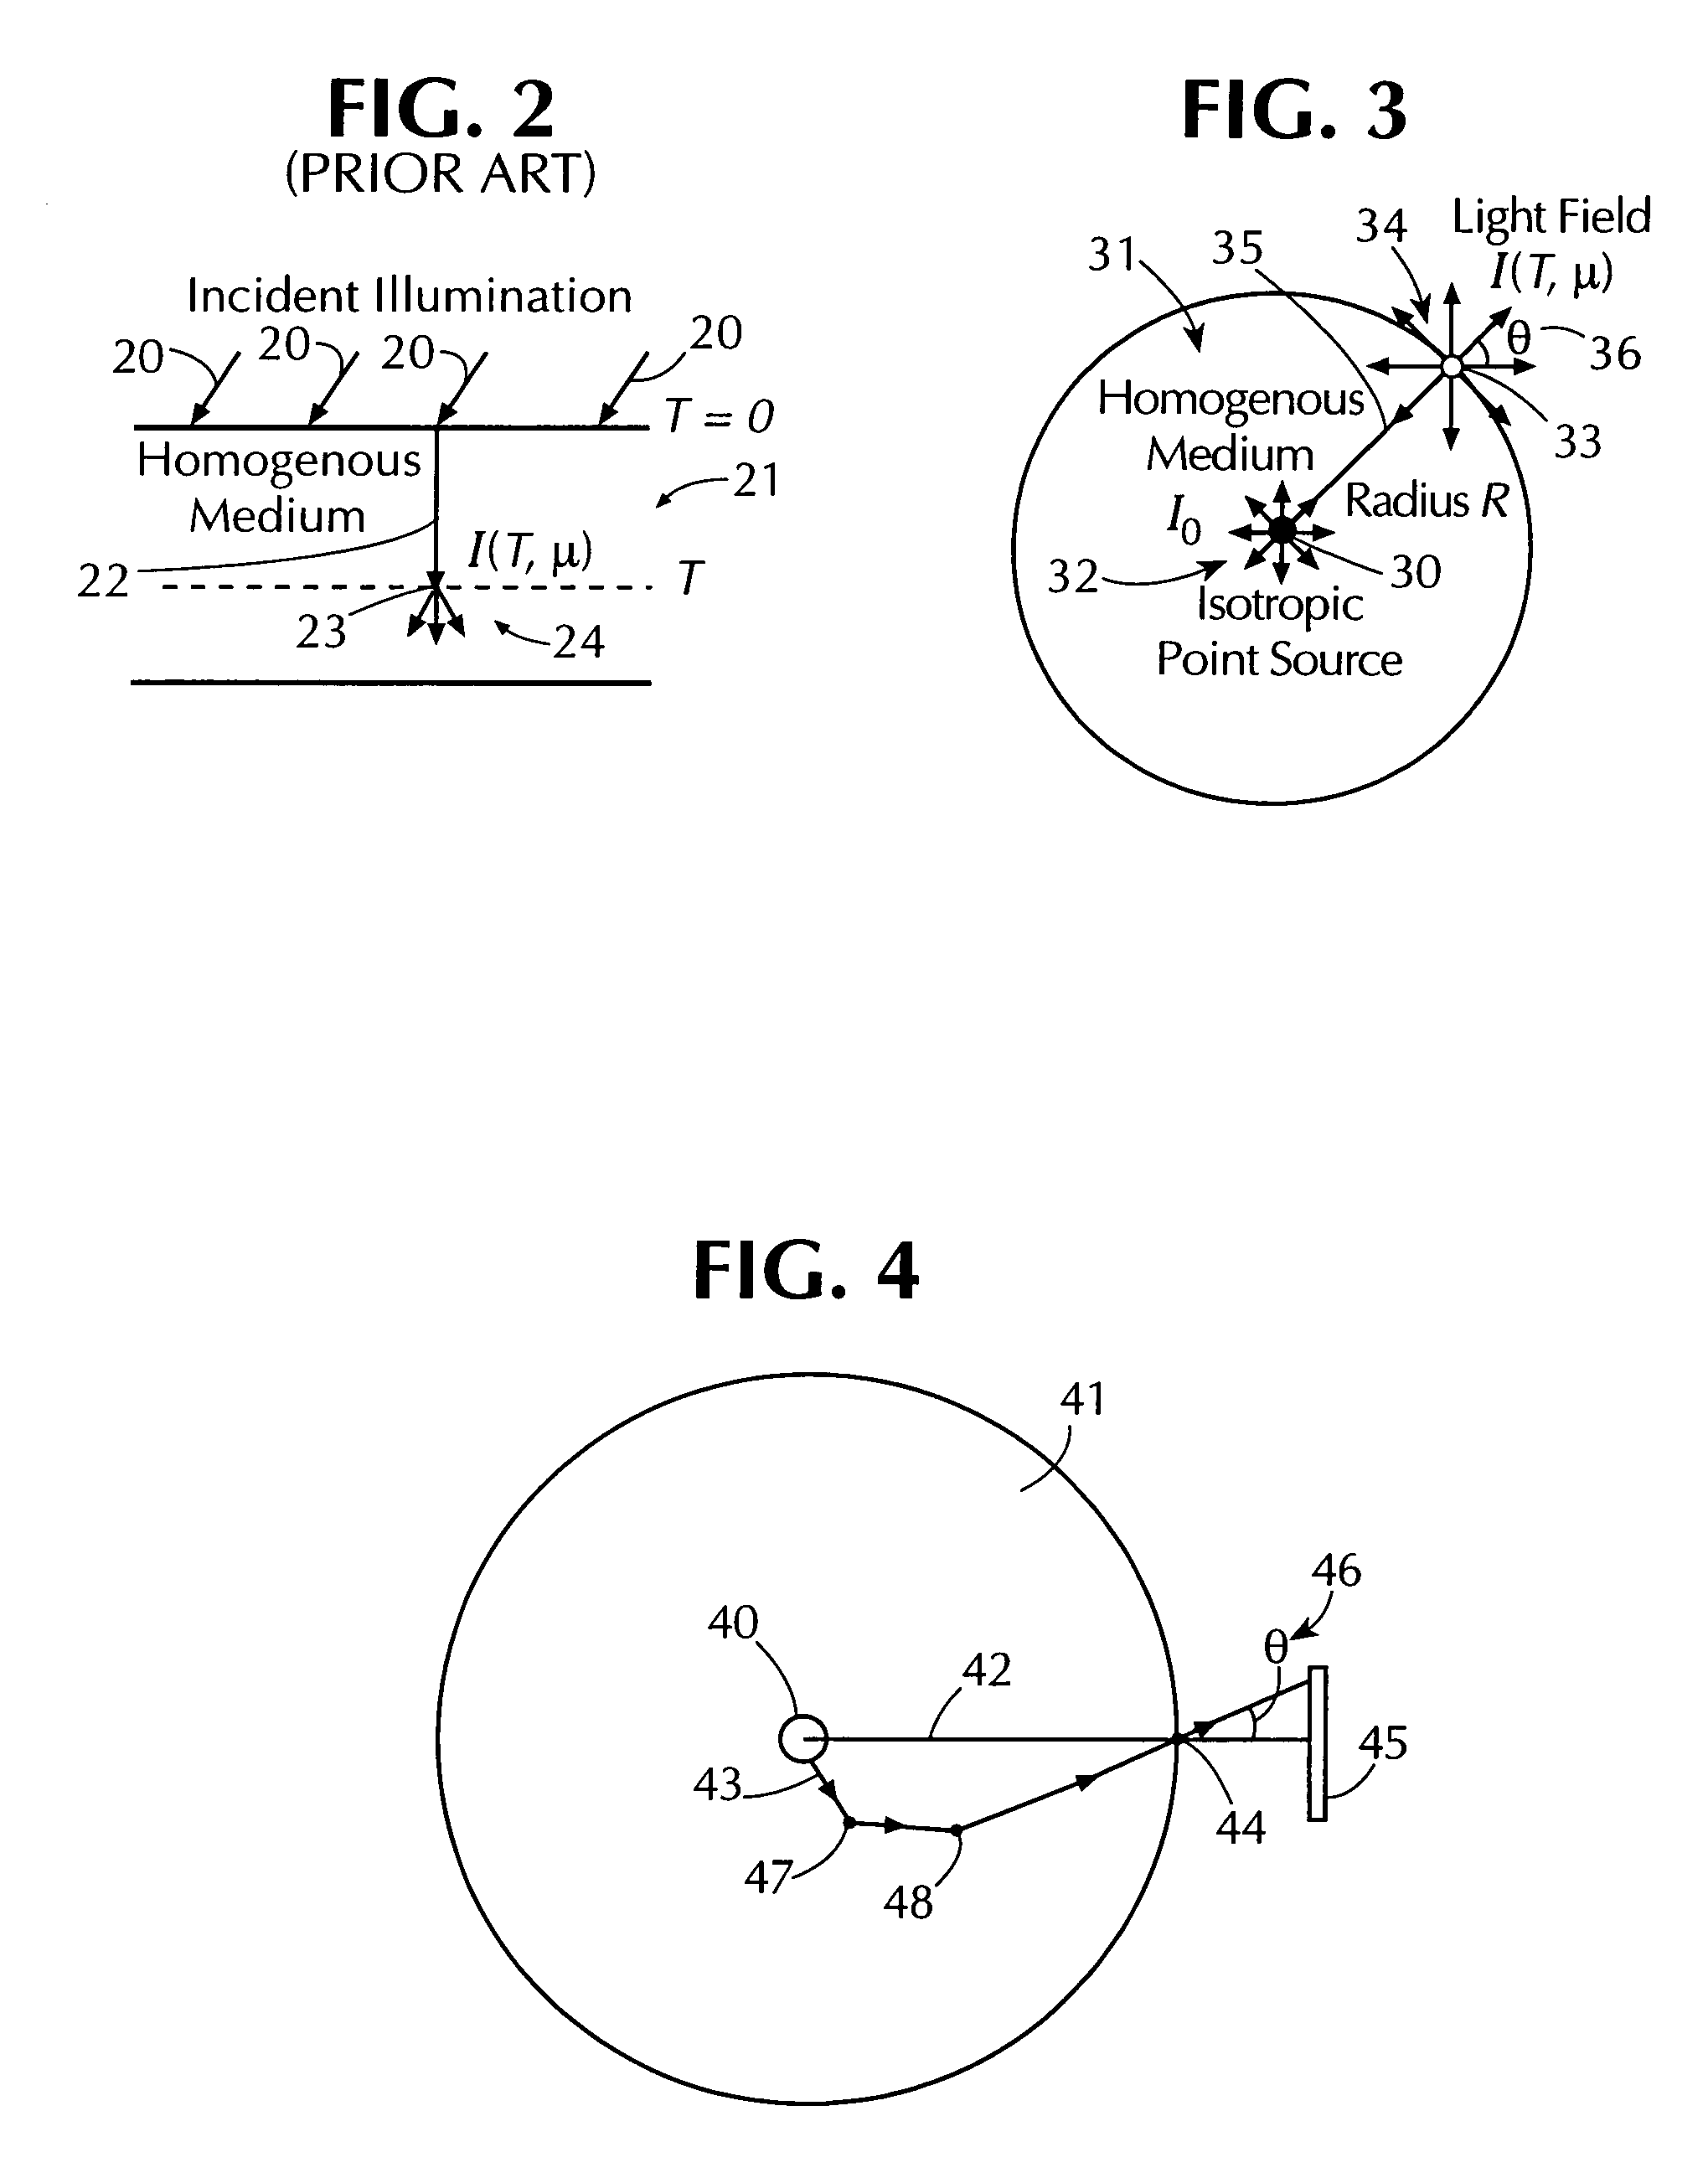 Systems and methods for modeling the impact of a medium on the appearances of encompassed light sources